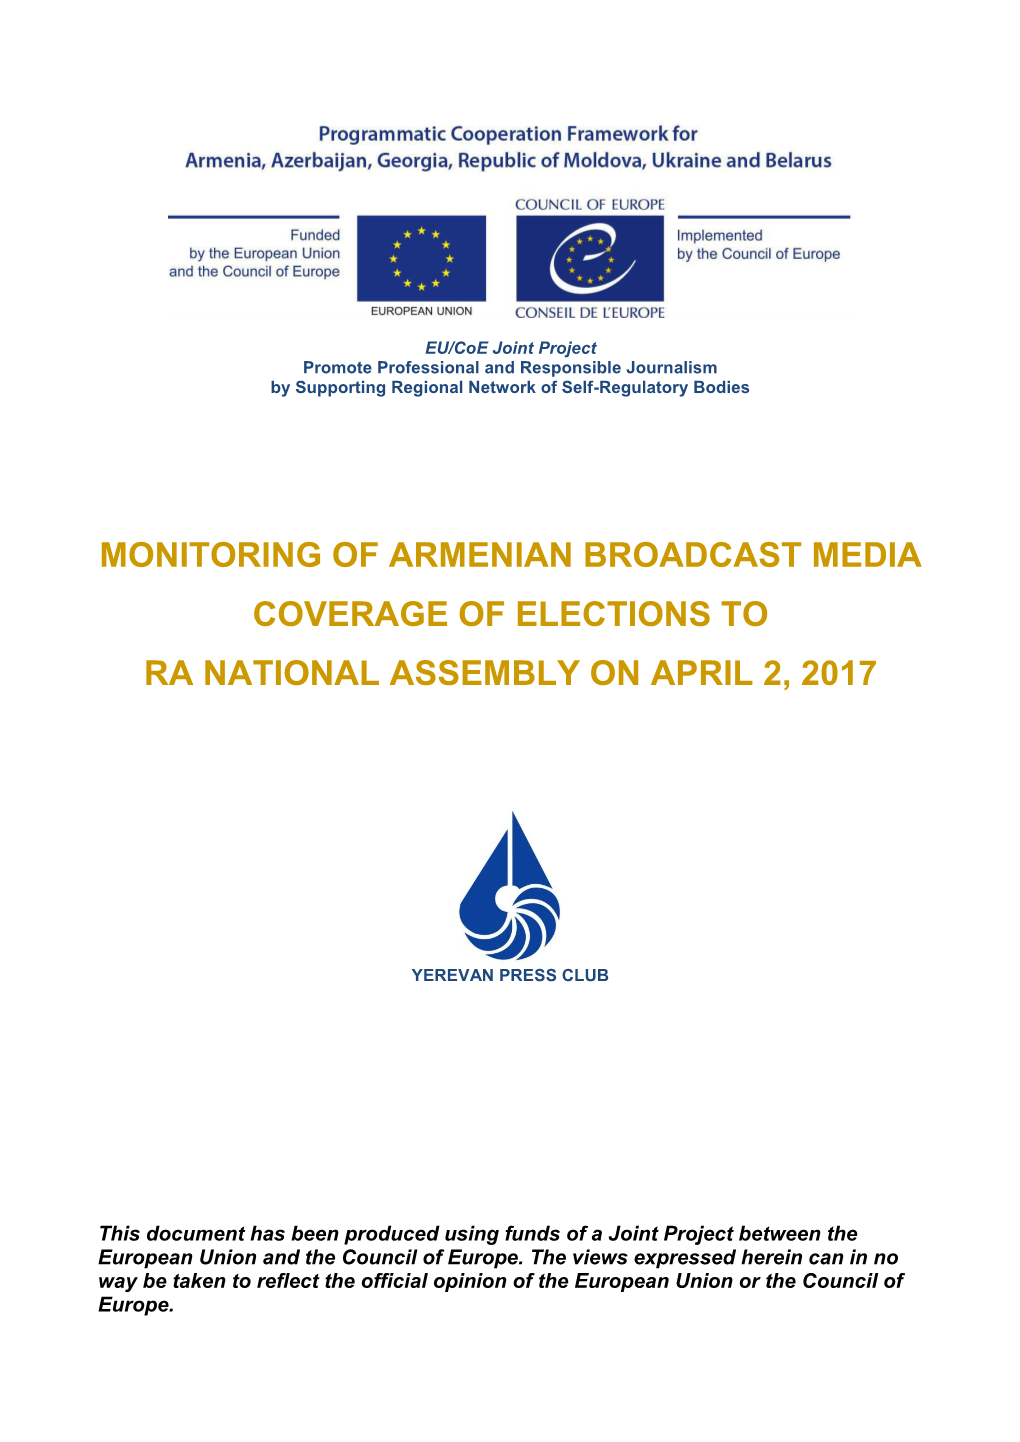 Monitoring of Armenian Broadcast Media Coverage of Elections to Ra National Assembly on April 2, 2017